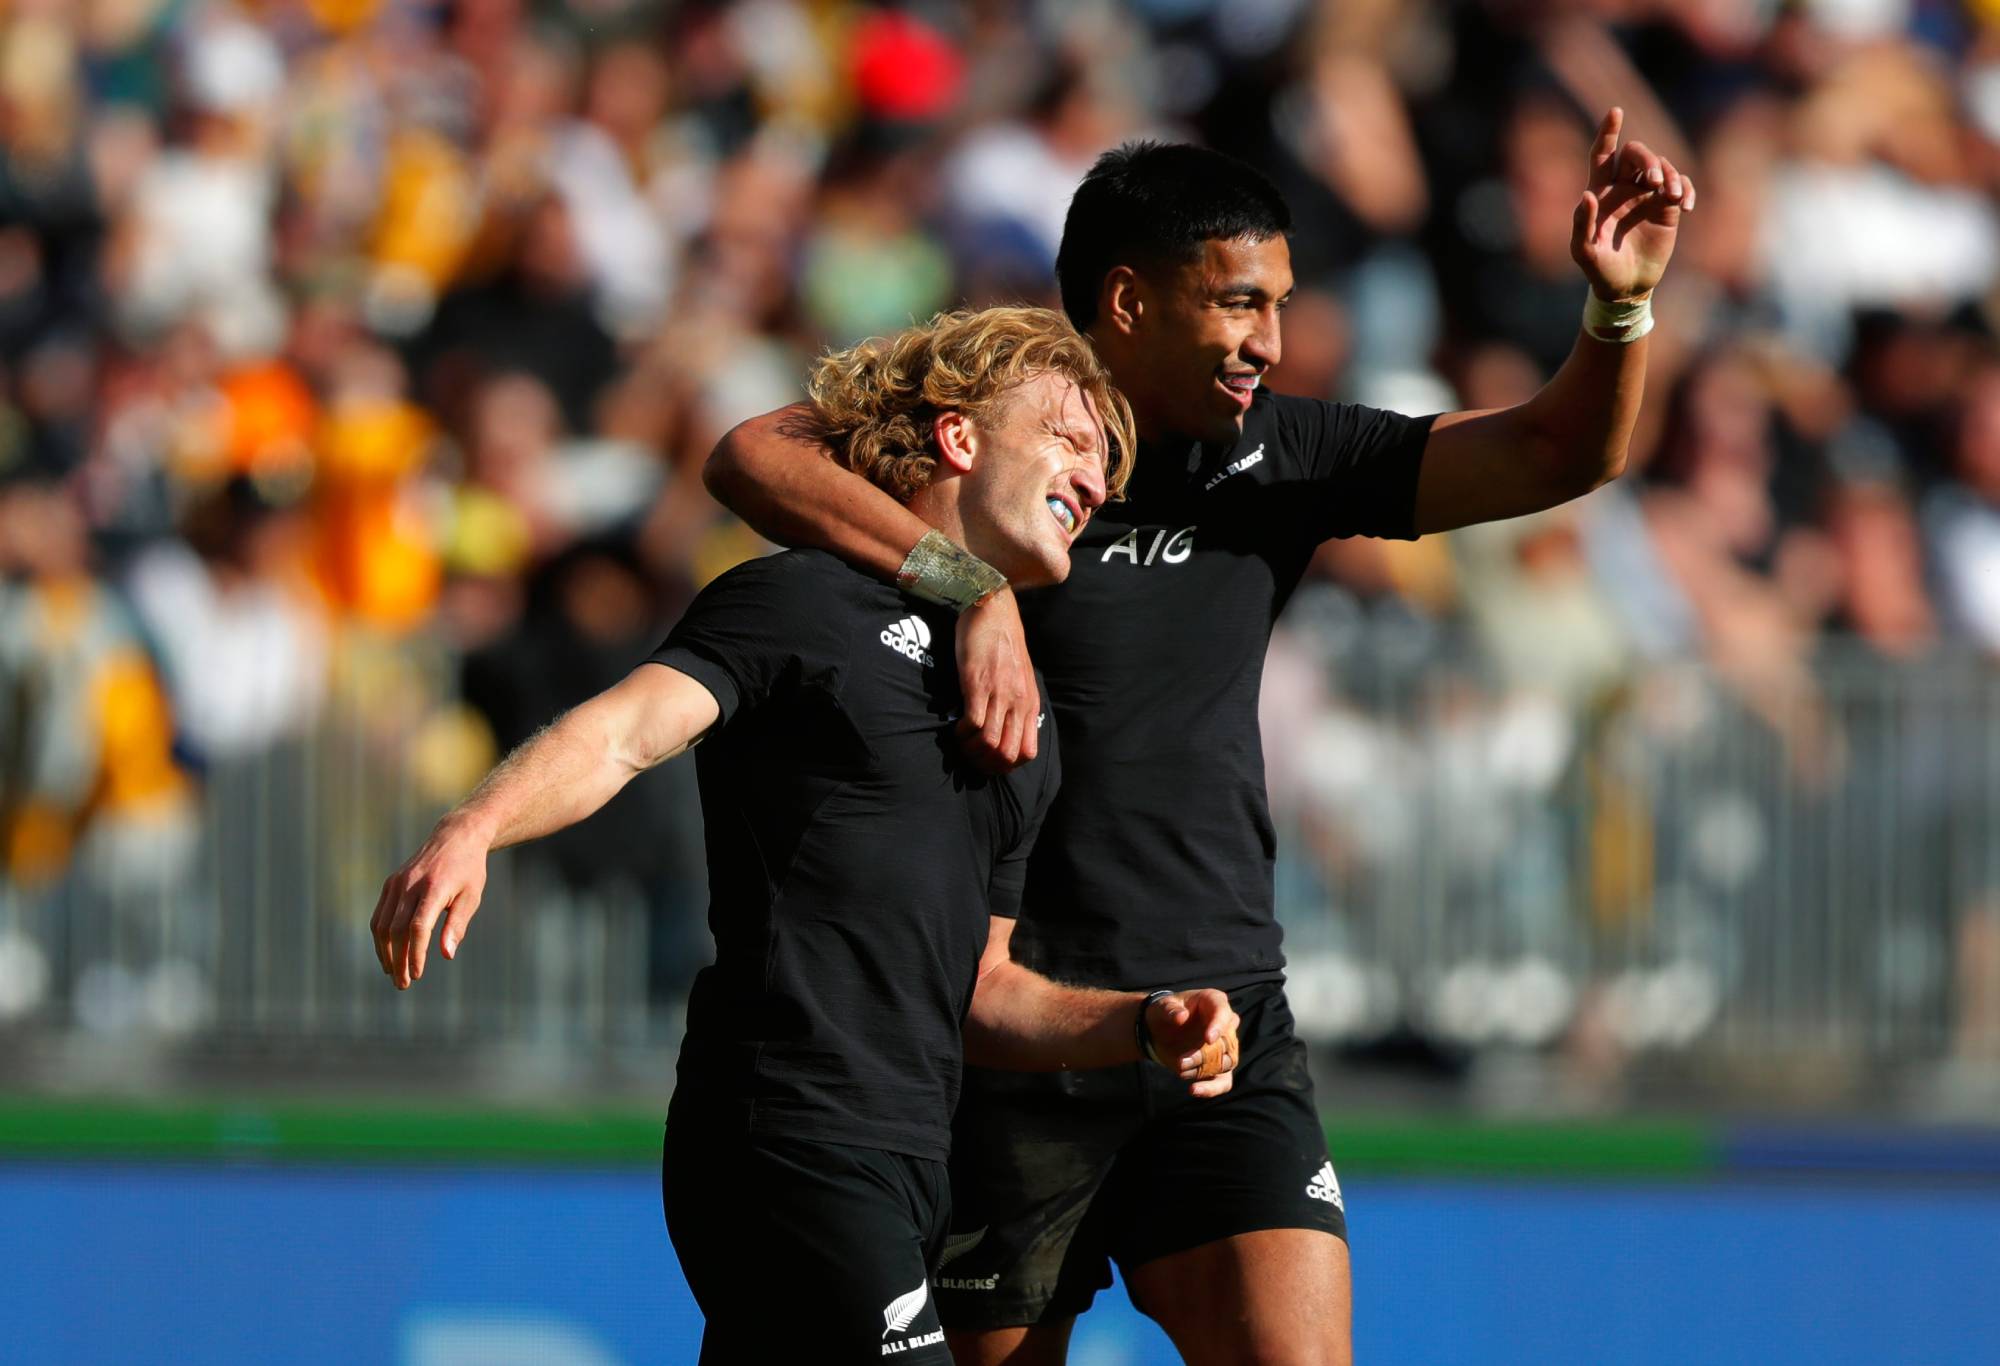 Damian McKenzie and Anton Lienert-Brown of the All Blacks celebrate a try during the Bledisloe Cup match between the Australian Wallabies and the New Zealand All Blacks, part of The Rugby Championship, at Optus Stadium on September 05, 2021 in Perth, Australia. (Photo by James Worsfold/Getty Images)